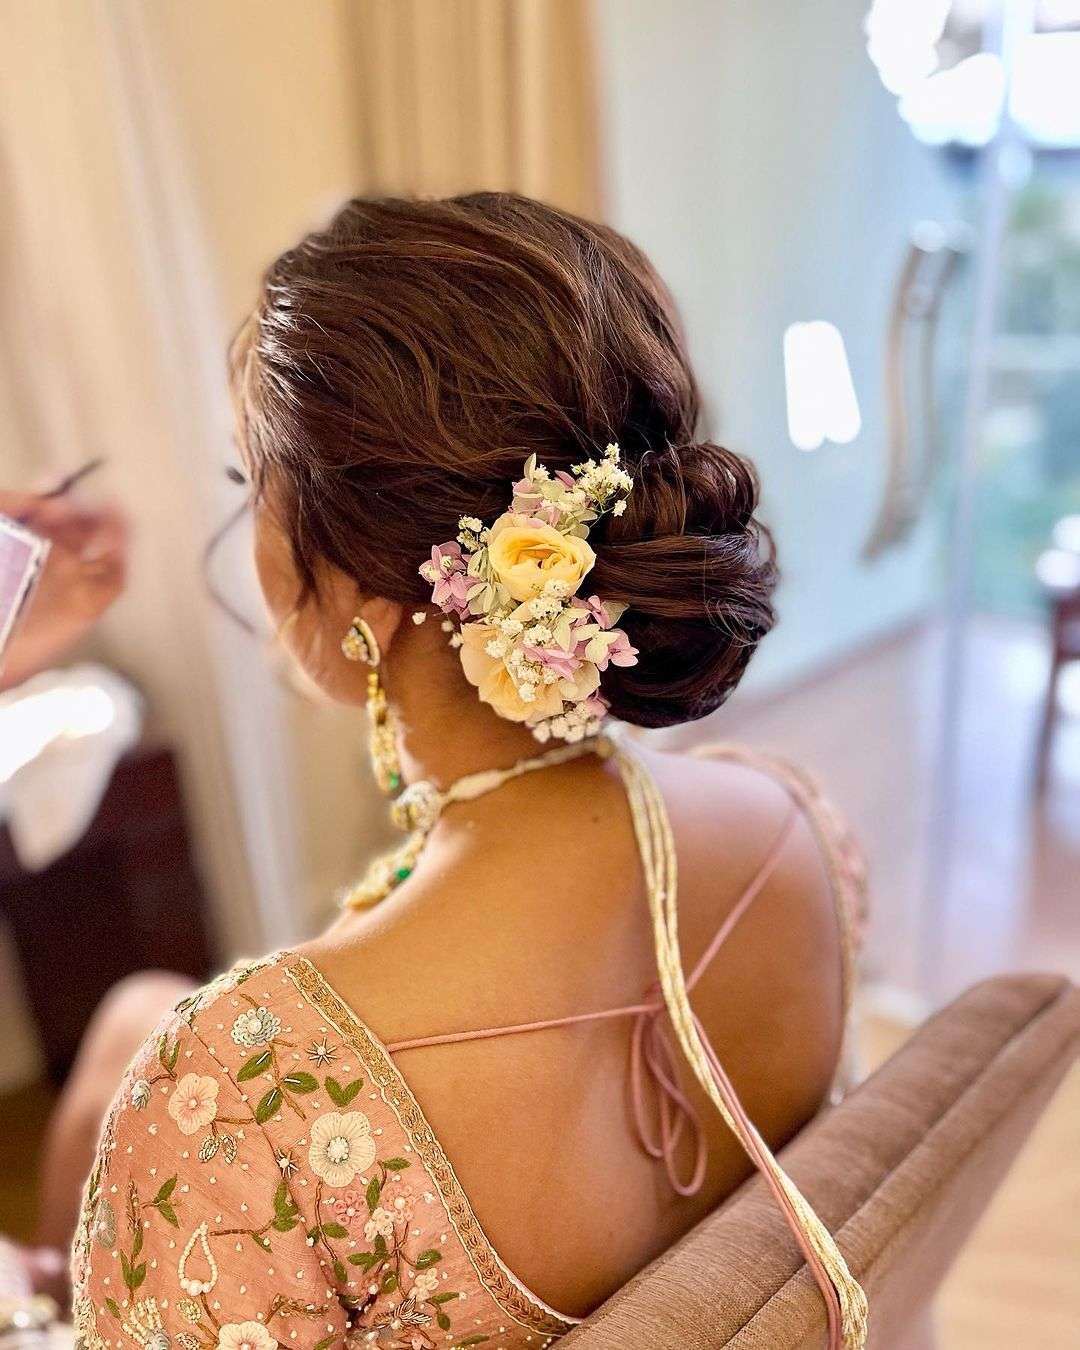 Instagram Alert! 🌸🌺 Fresh Flower Hairstyles - Super Pretty ways to use  Flowers in your Hair! - Witty Vows | Hair styles, Indian bridal hairstyles,  Wedding hairstyles